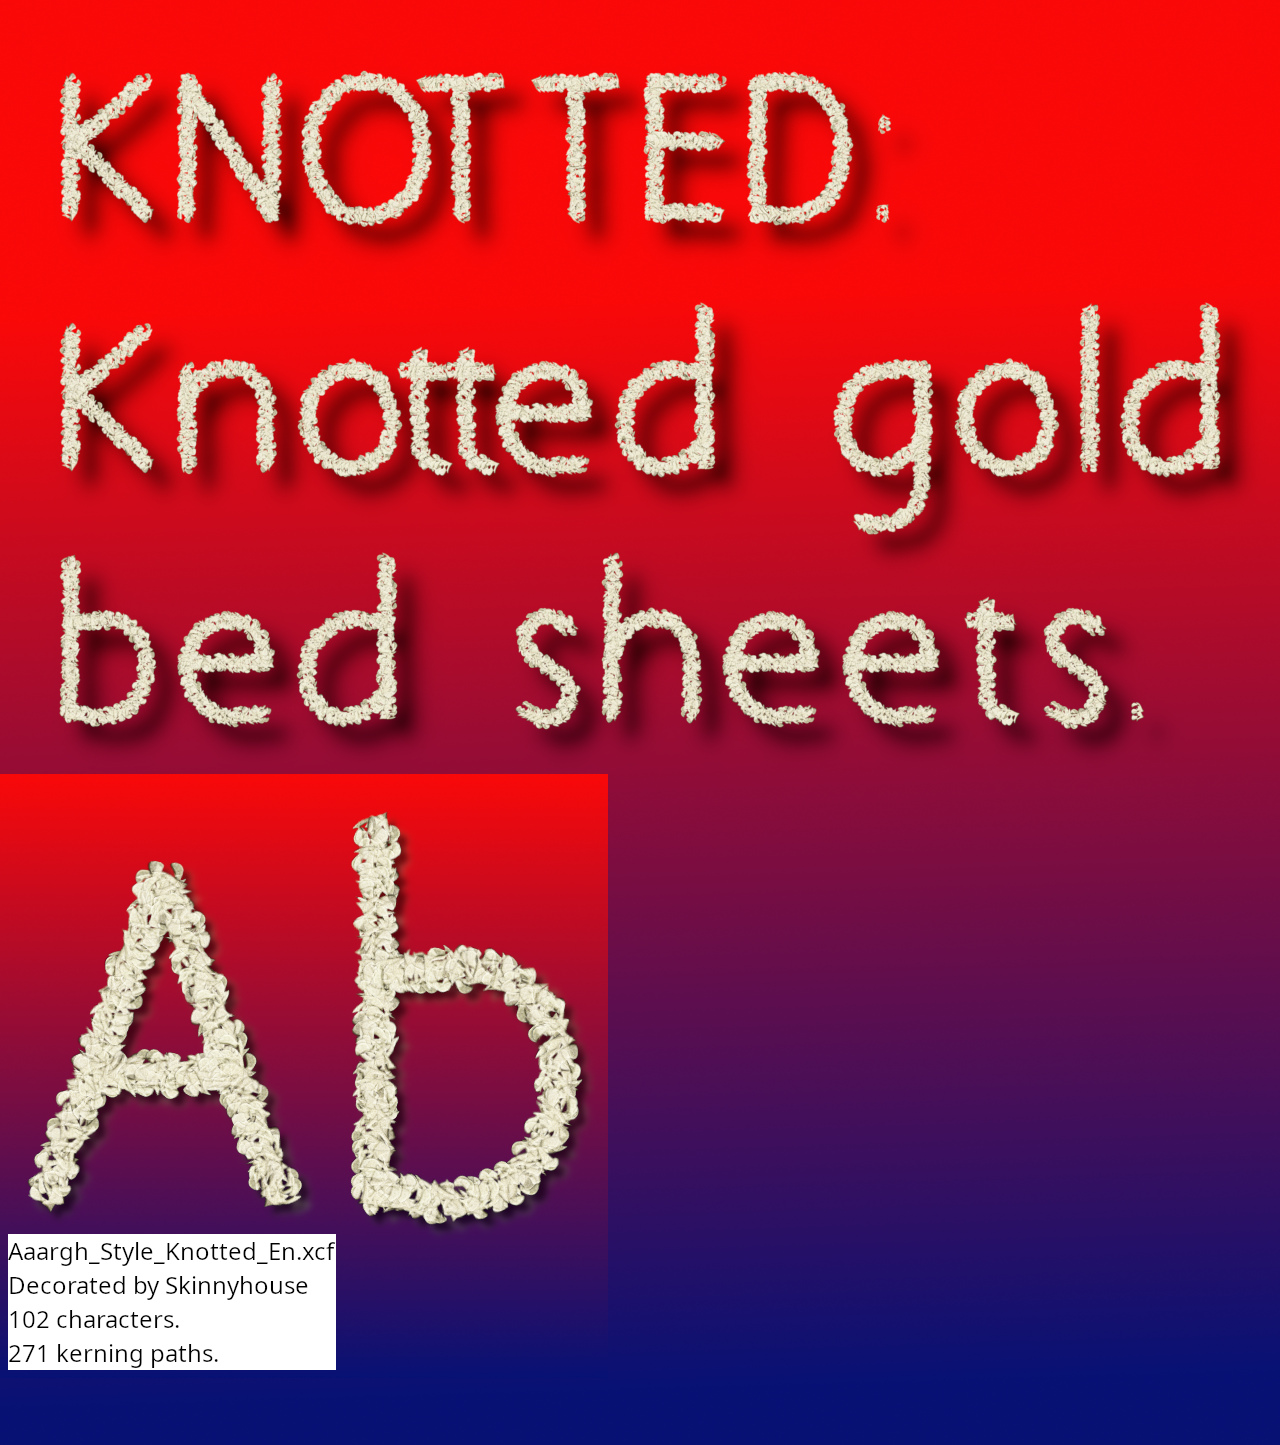 Knotted.jpg